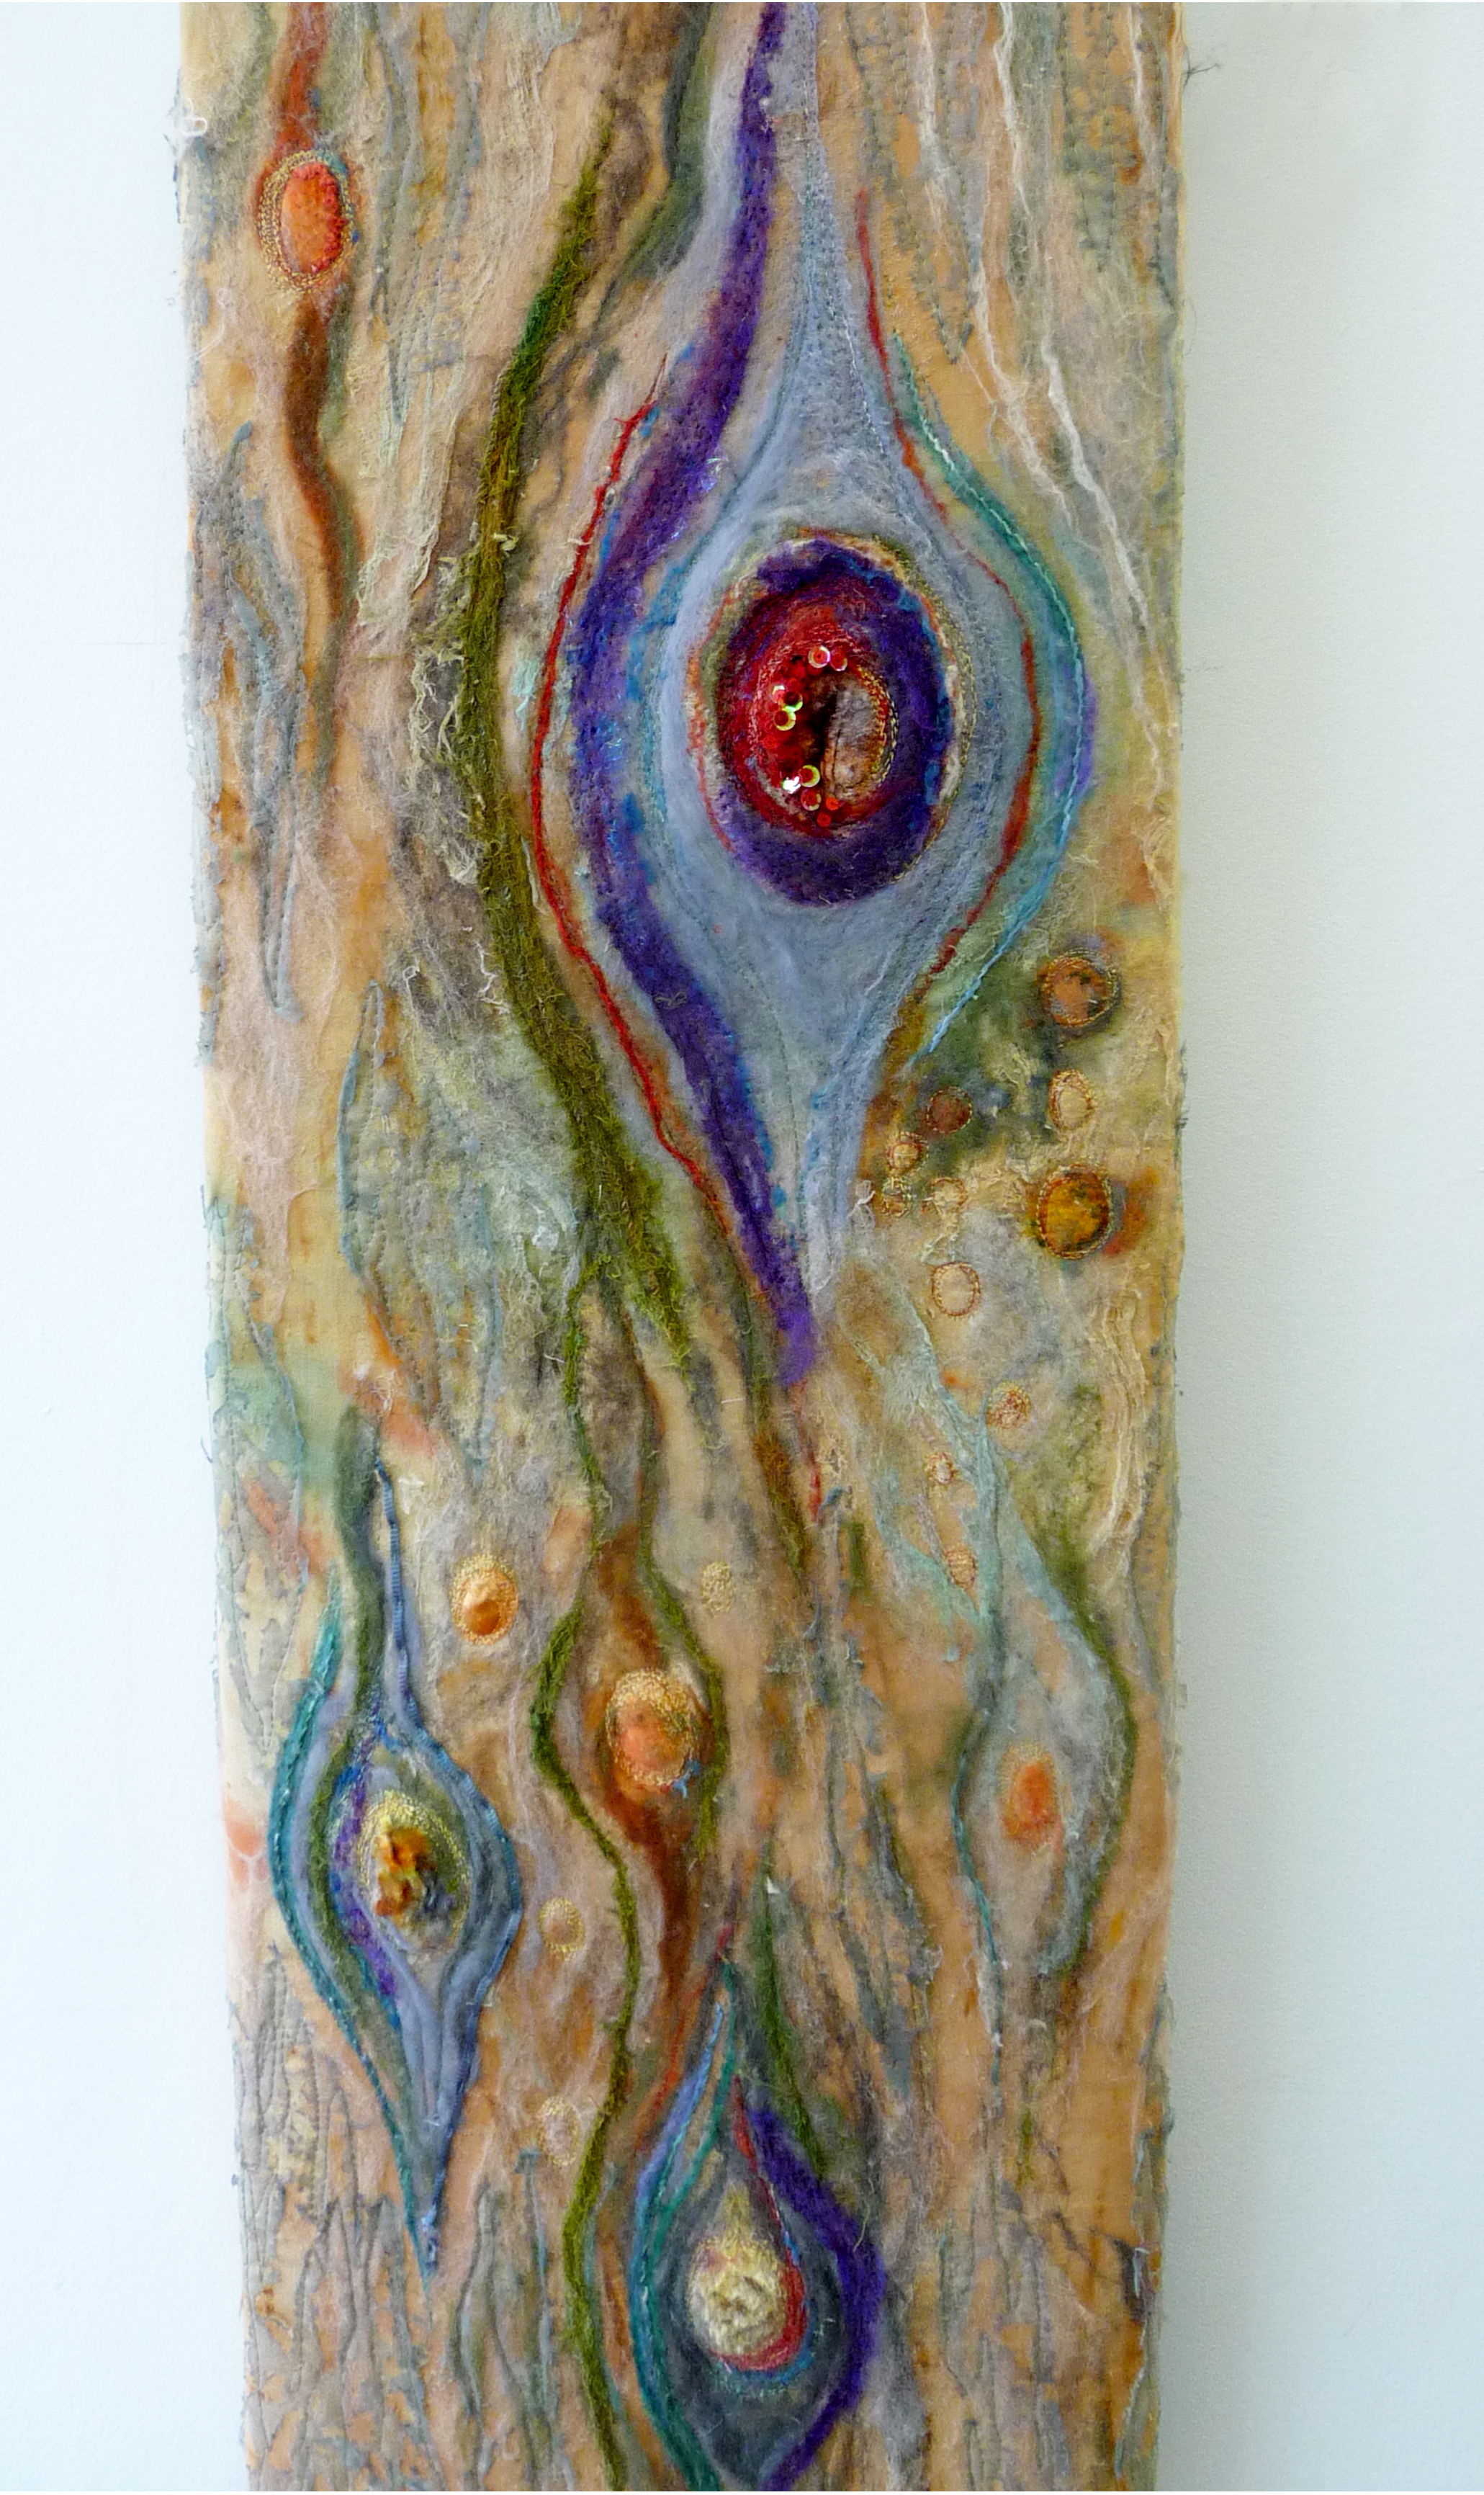 JAZZY JUPITER by Pat Bean, machine embroidery and needle felted